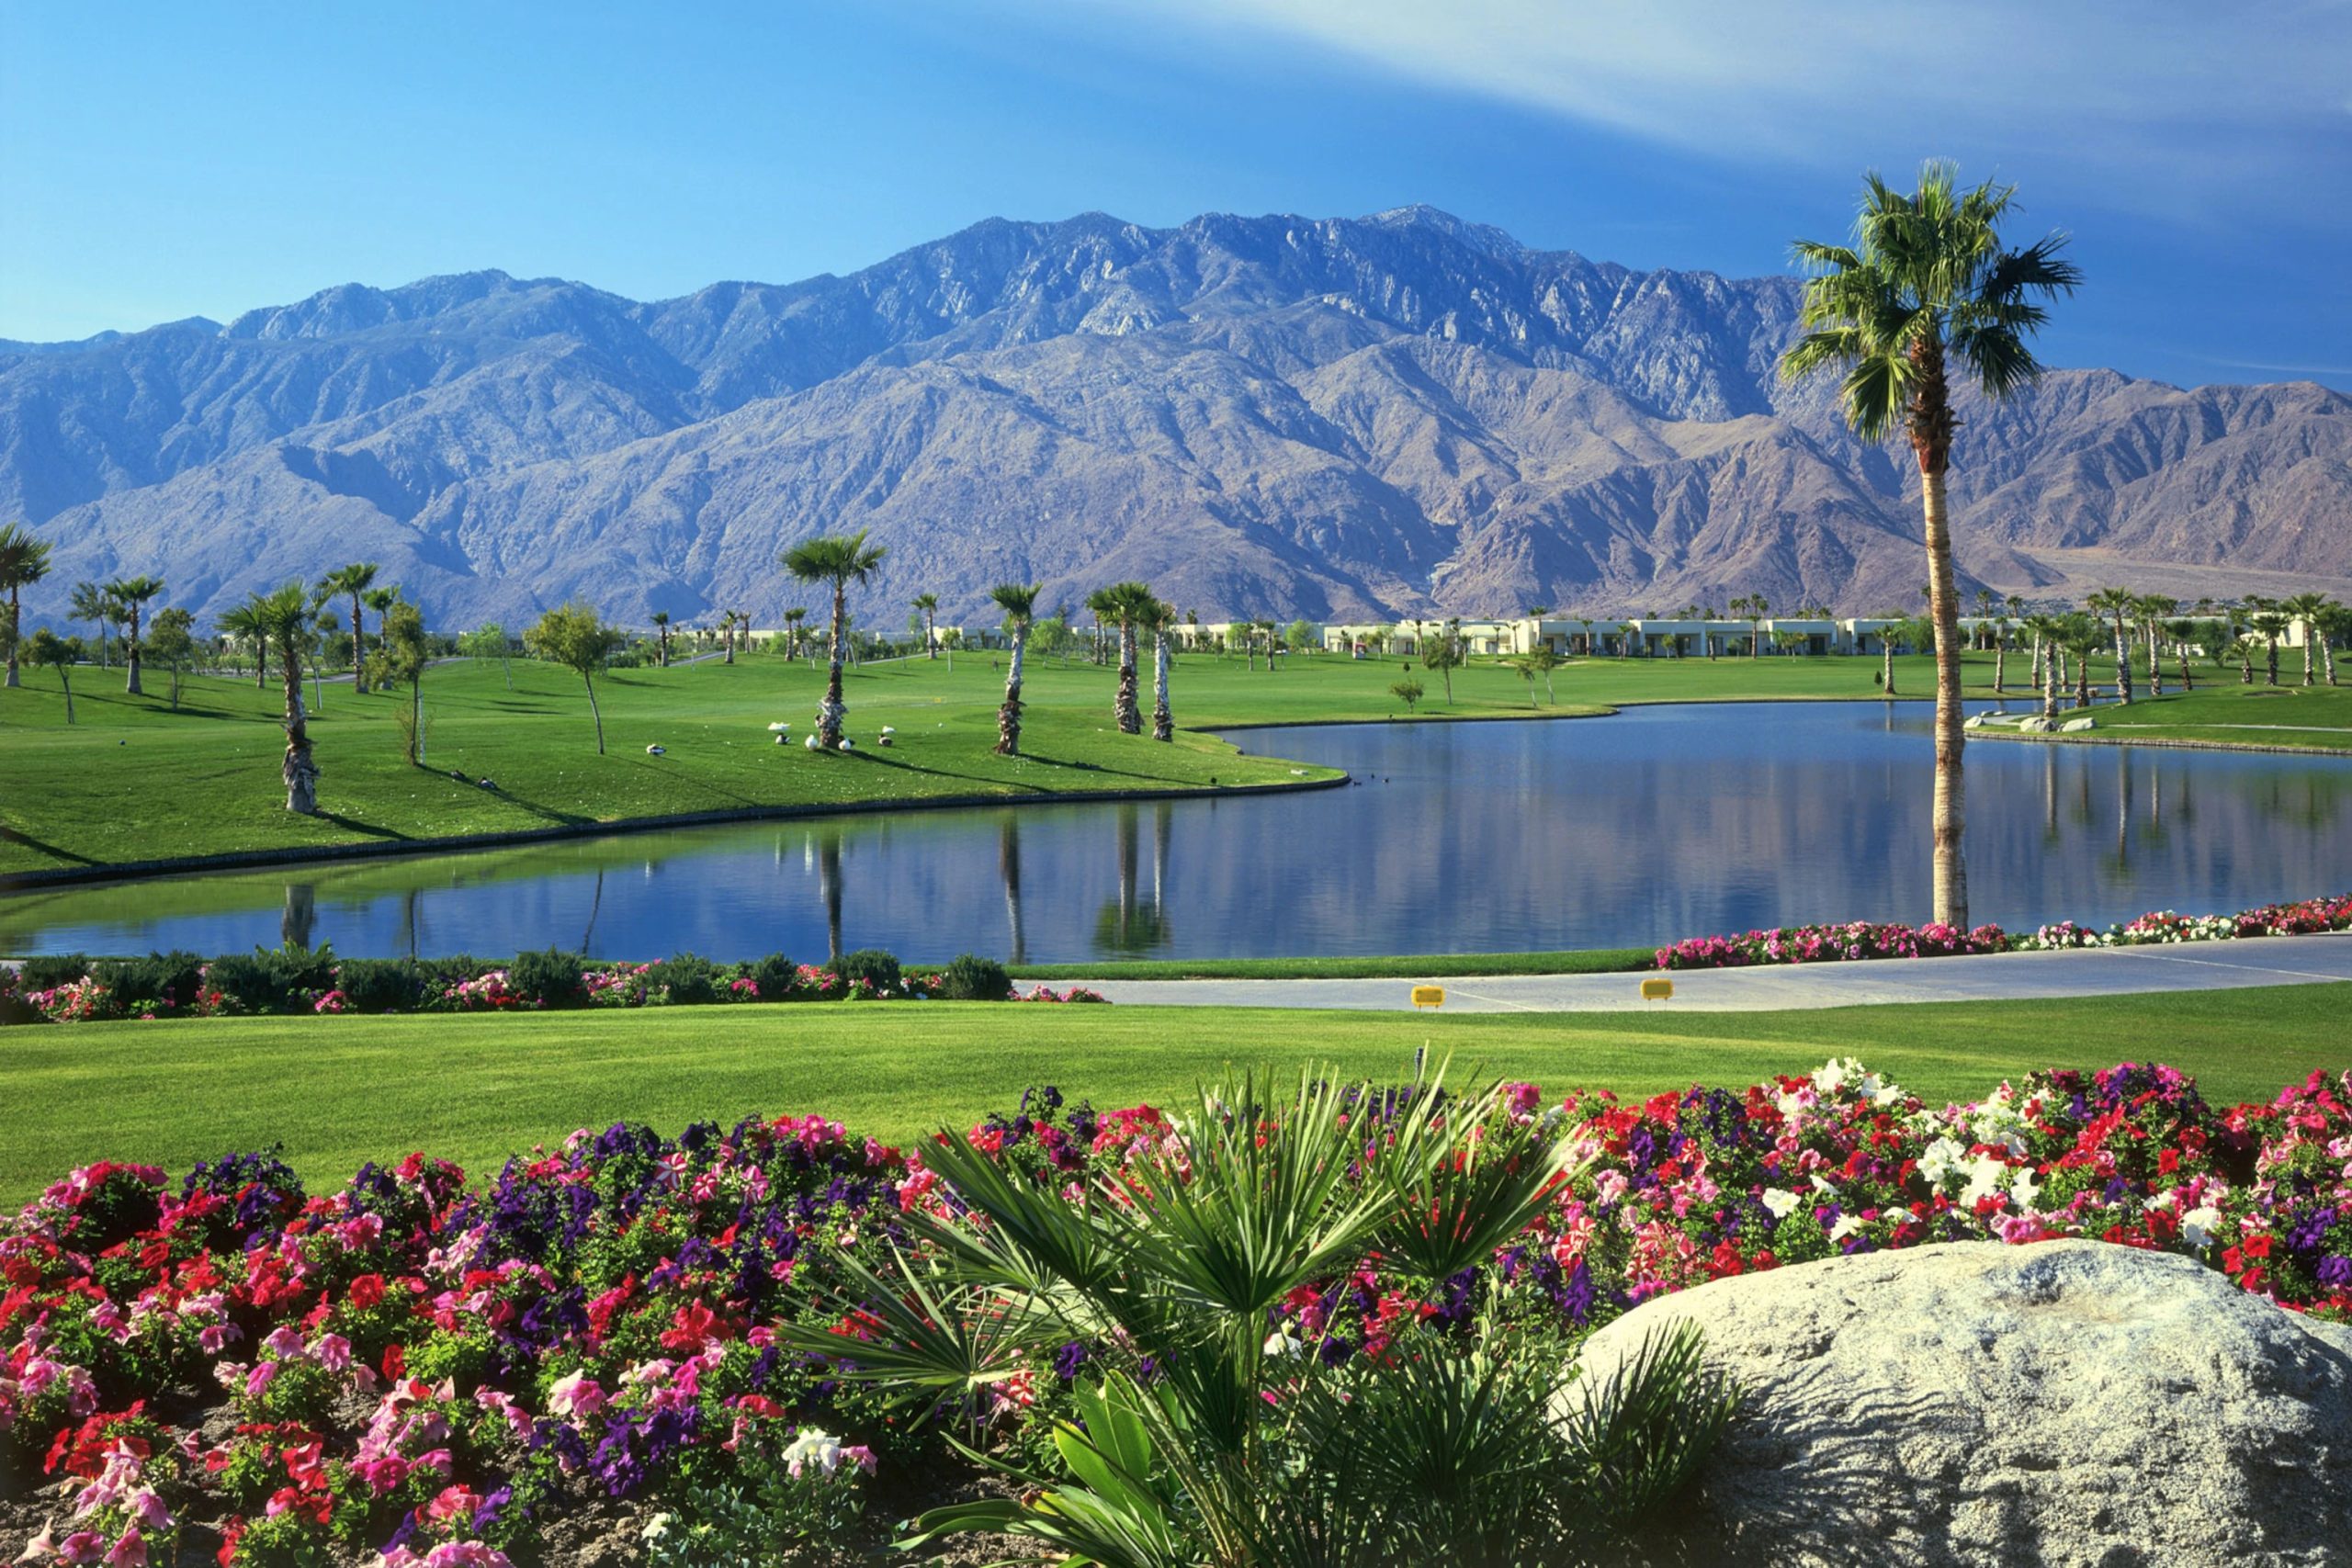 What Is Palm Springs Best Known For